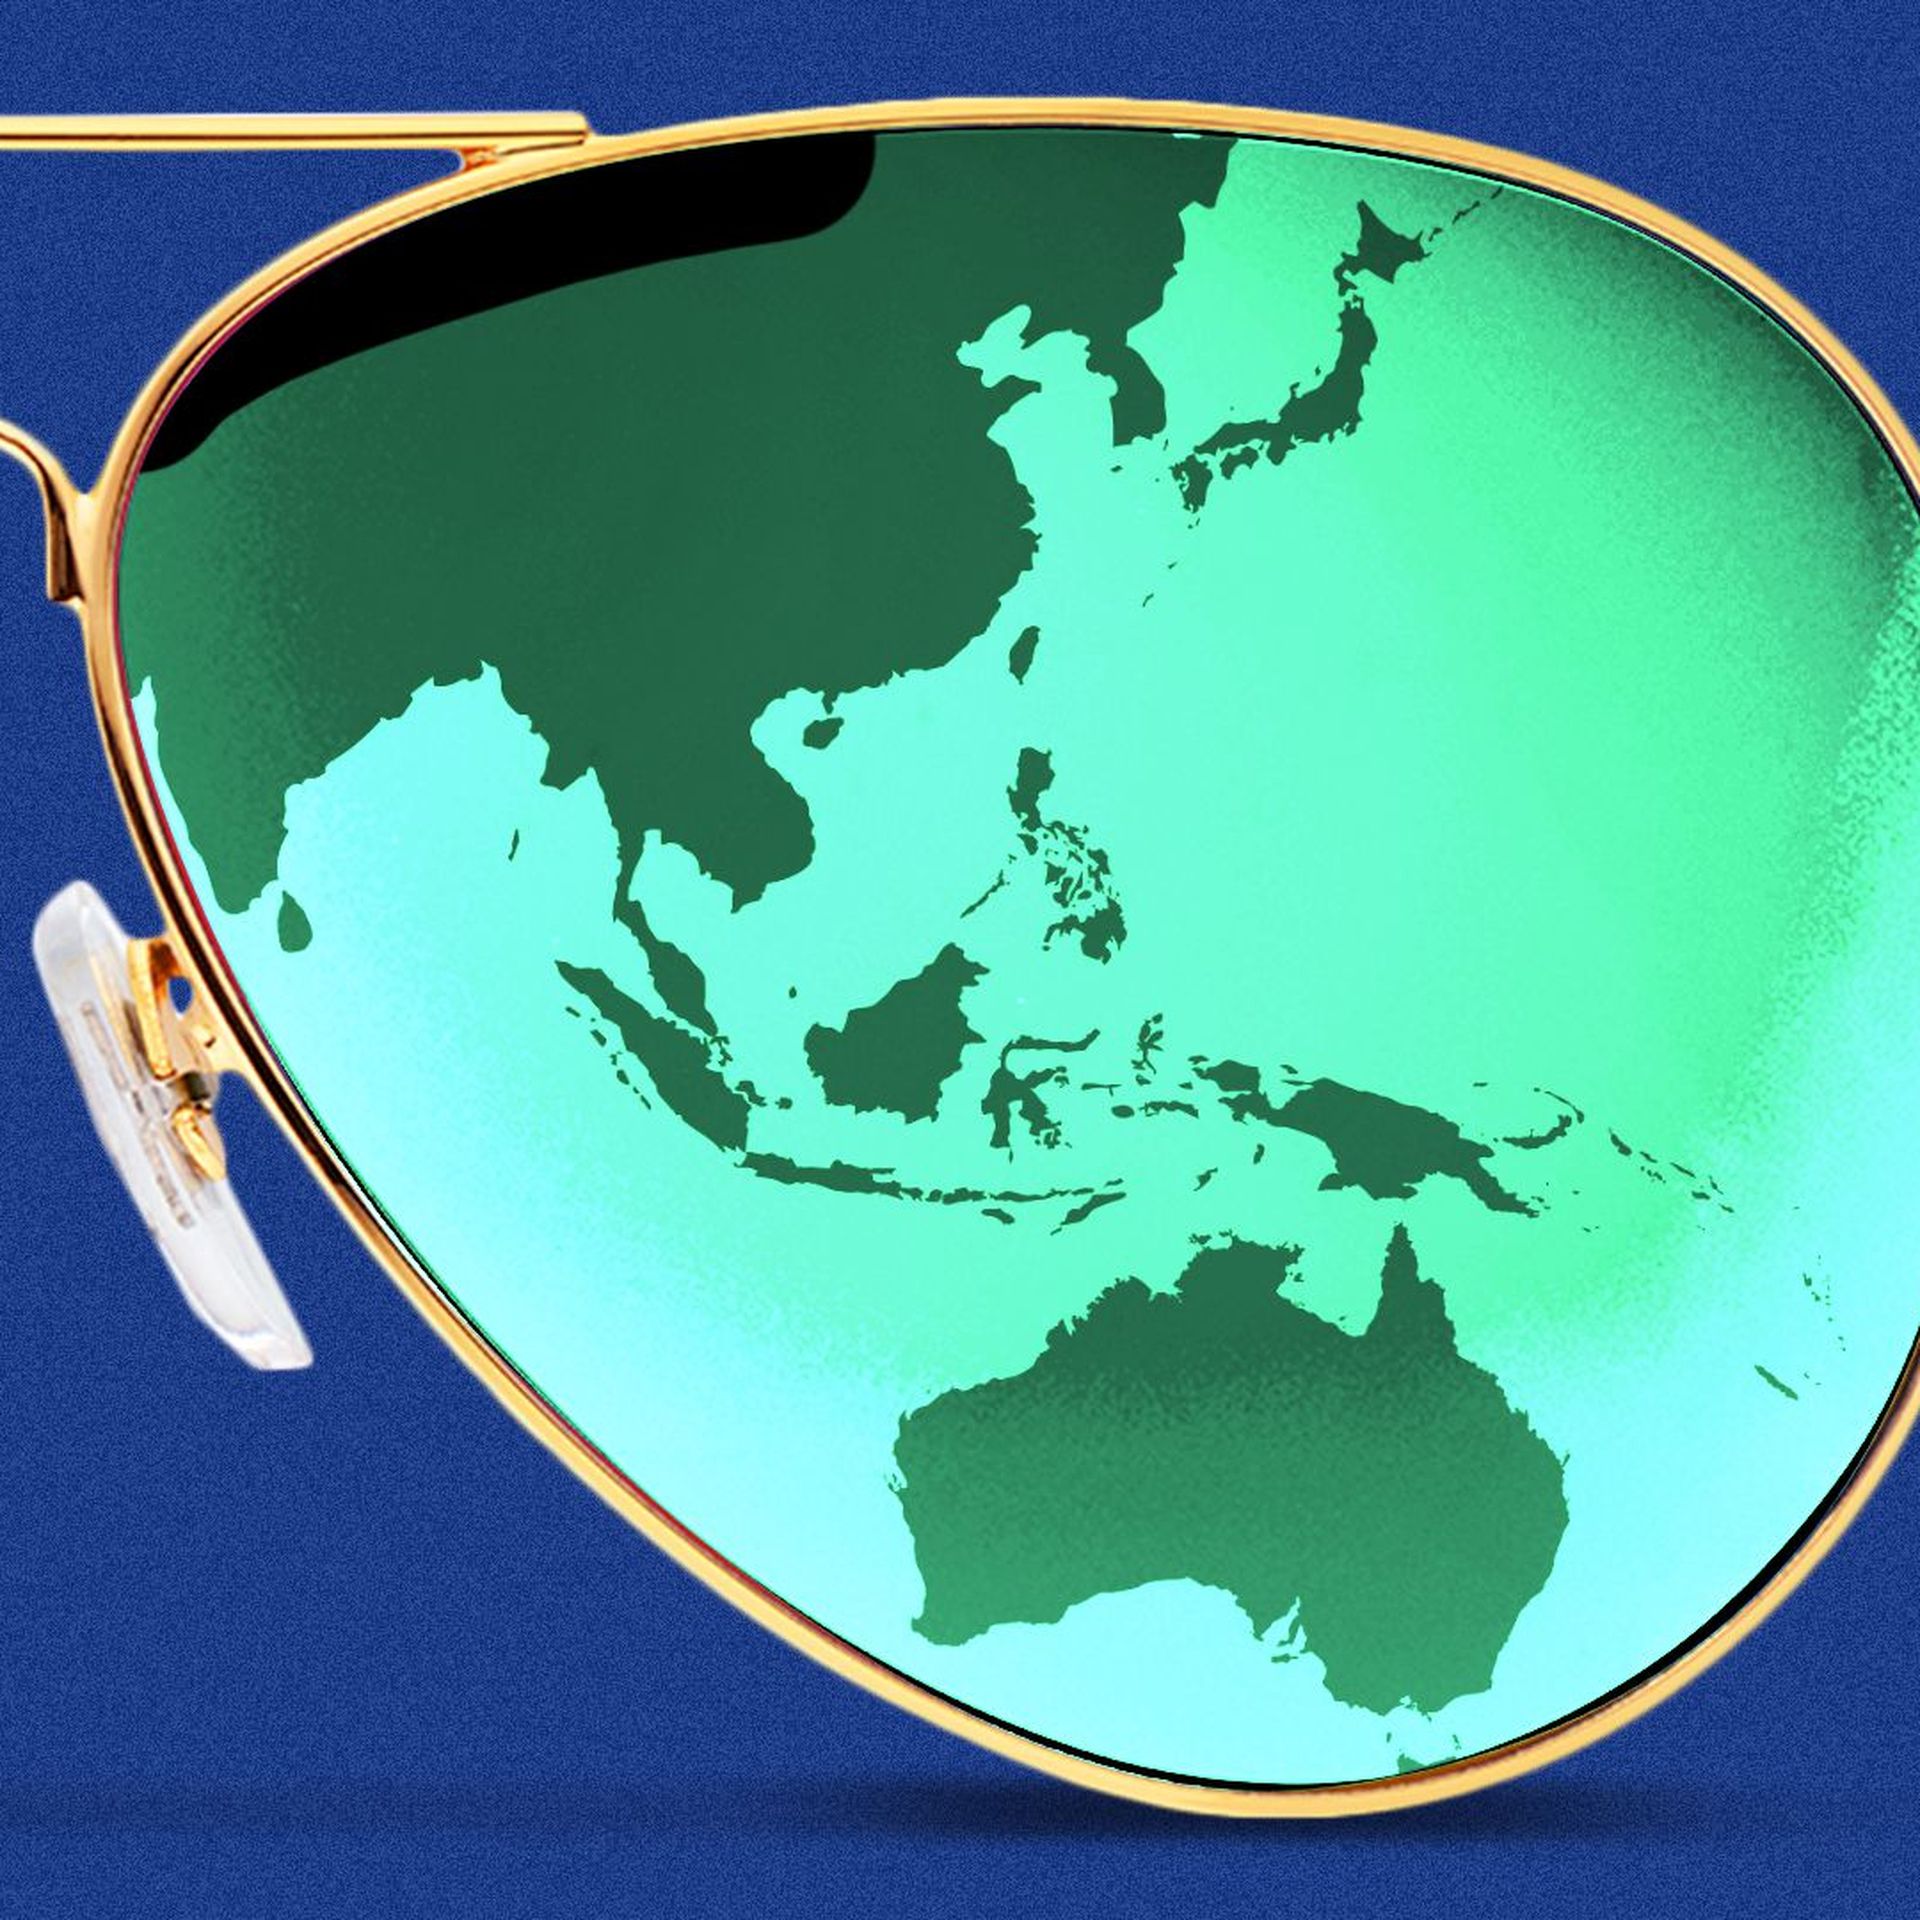 Illustration of a pair of aviator sunglasses with the Asia-Pacific region overlaid on one lens.